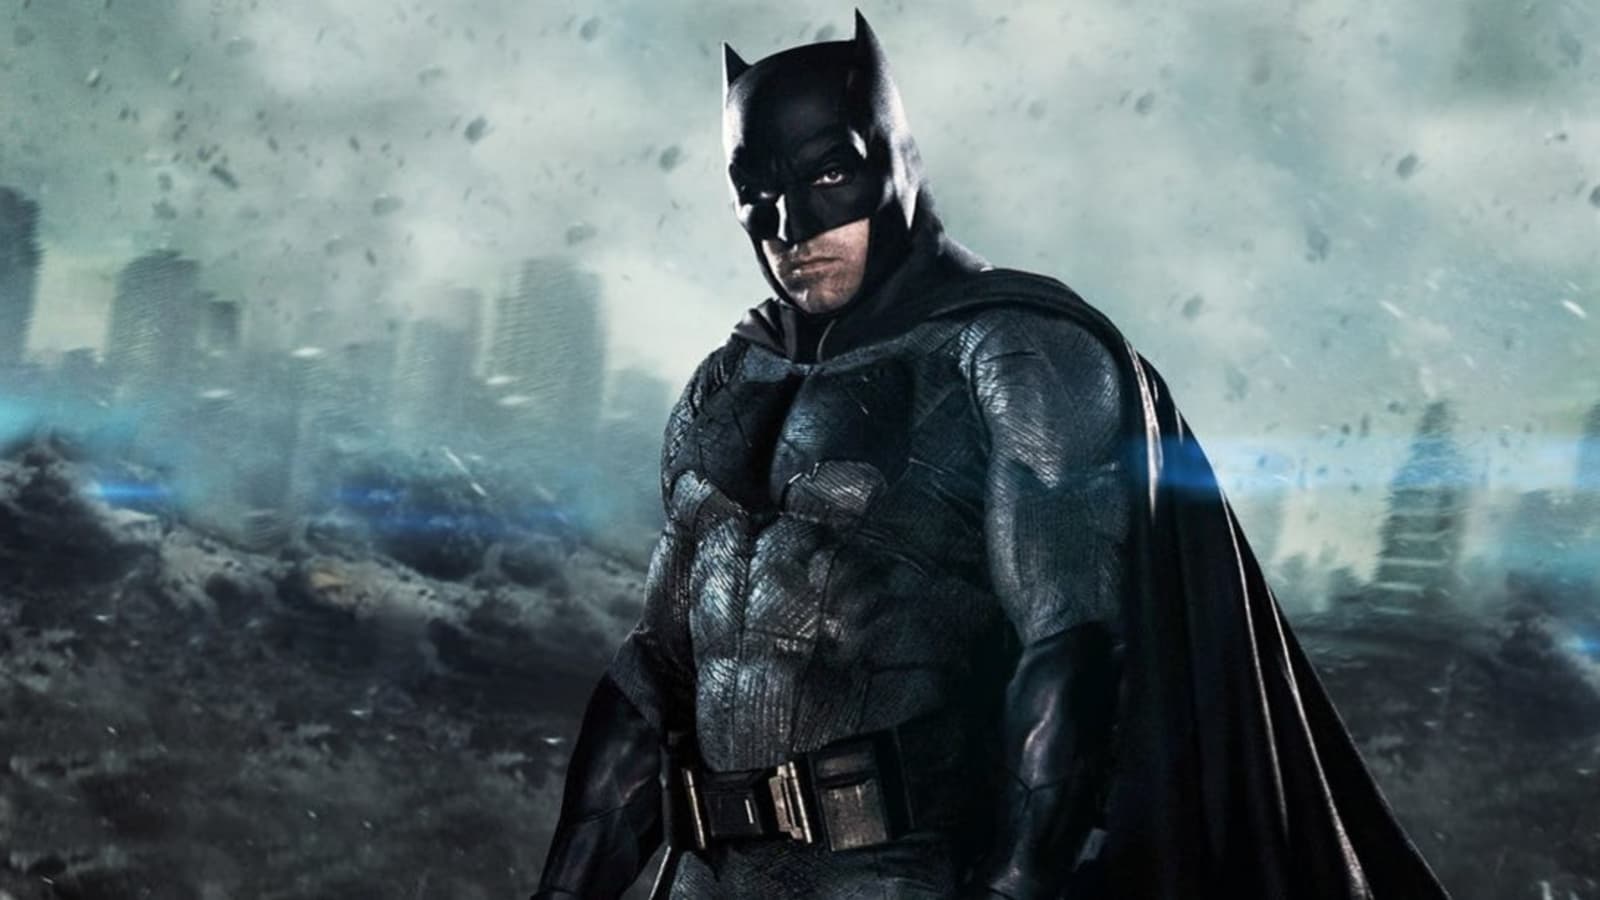 How to Watch Batman Movies and Shows in Order? - TechNadu